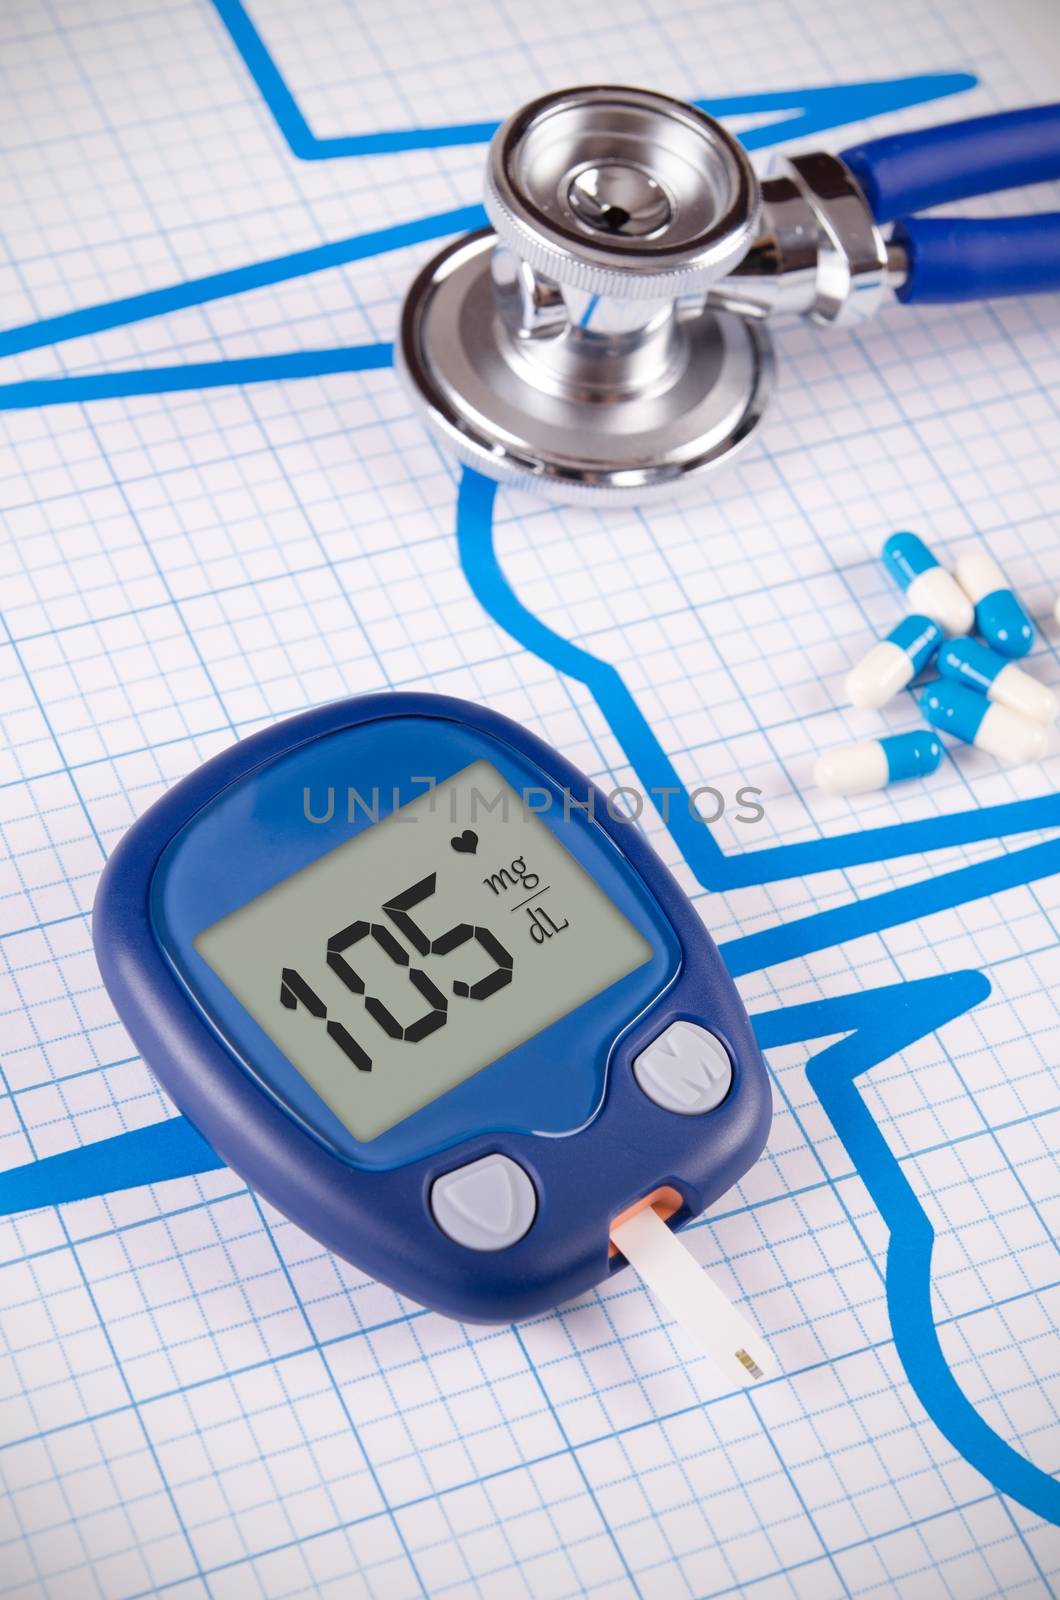 Glucometer and stethoscope on medical background by simpson33